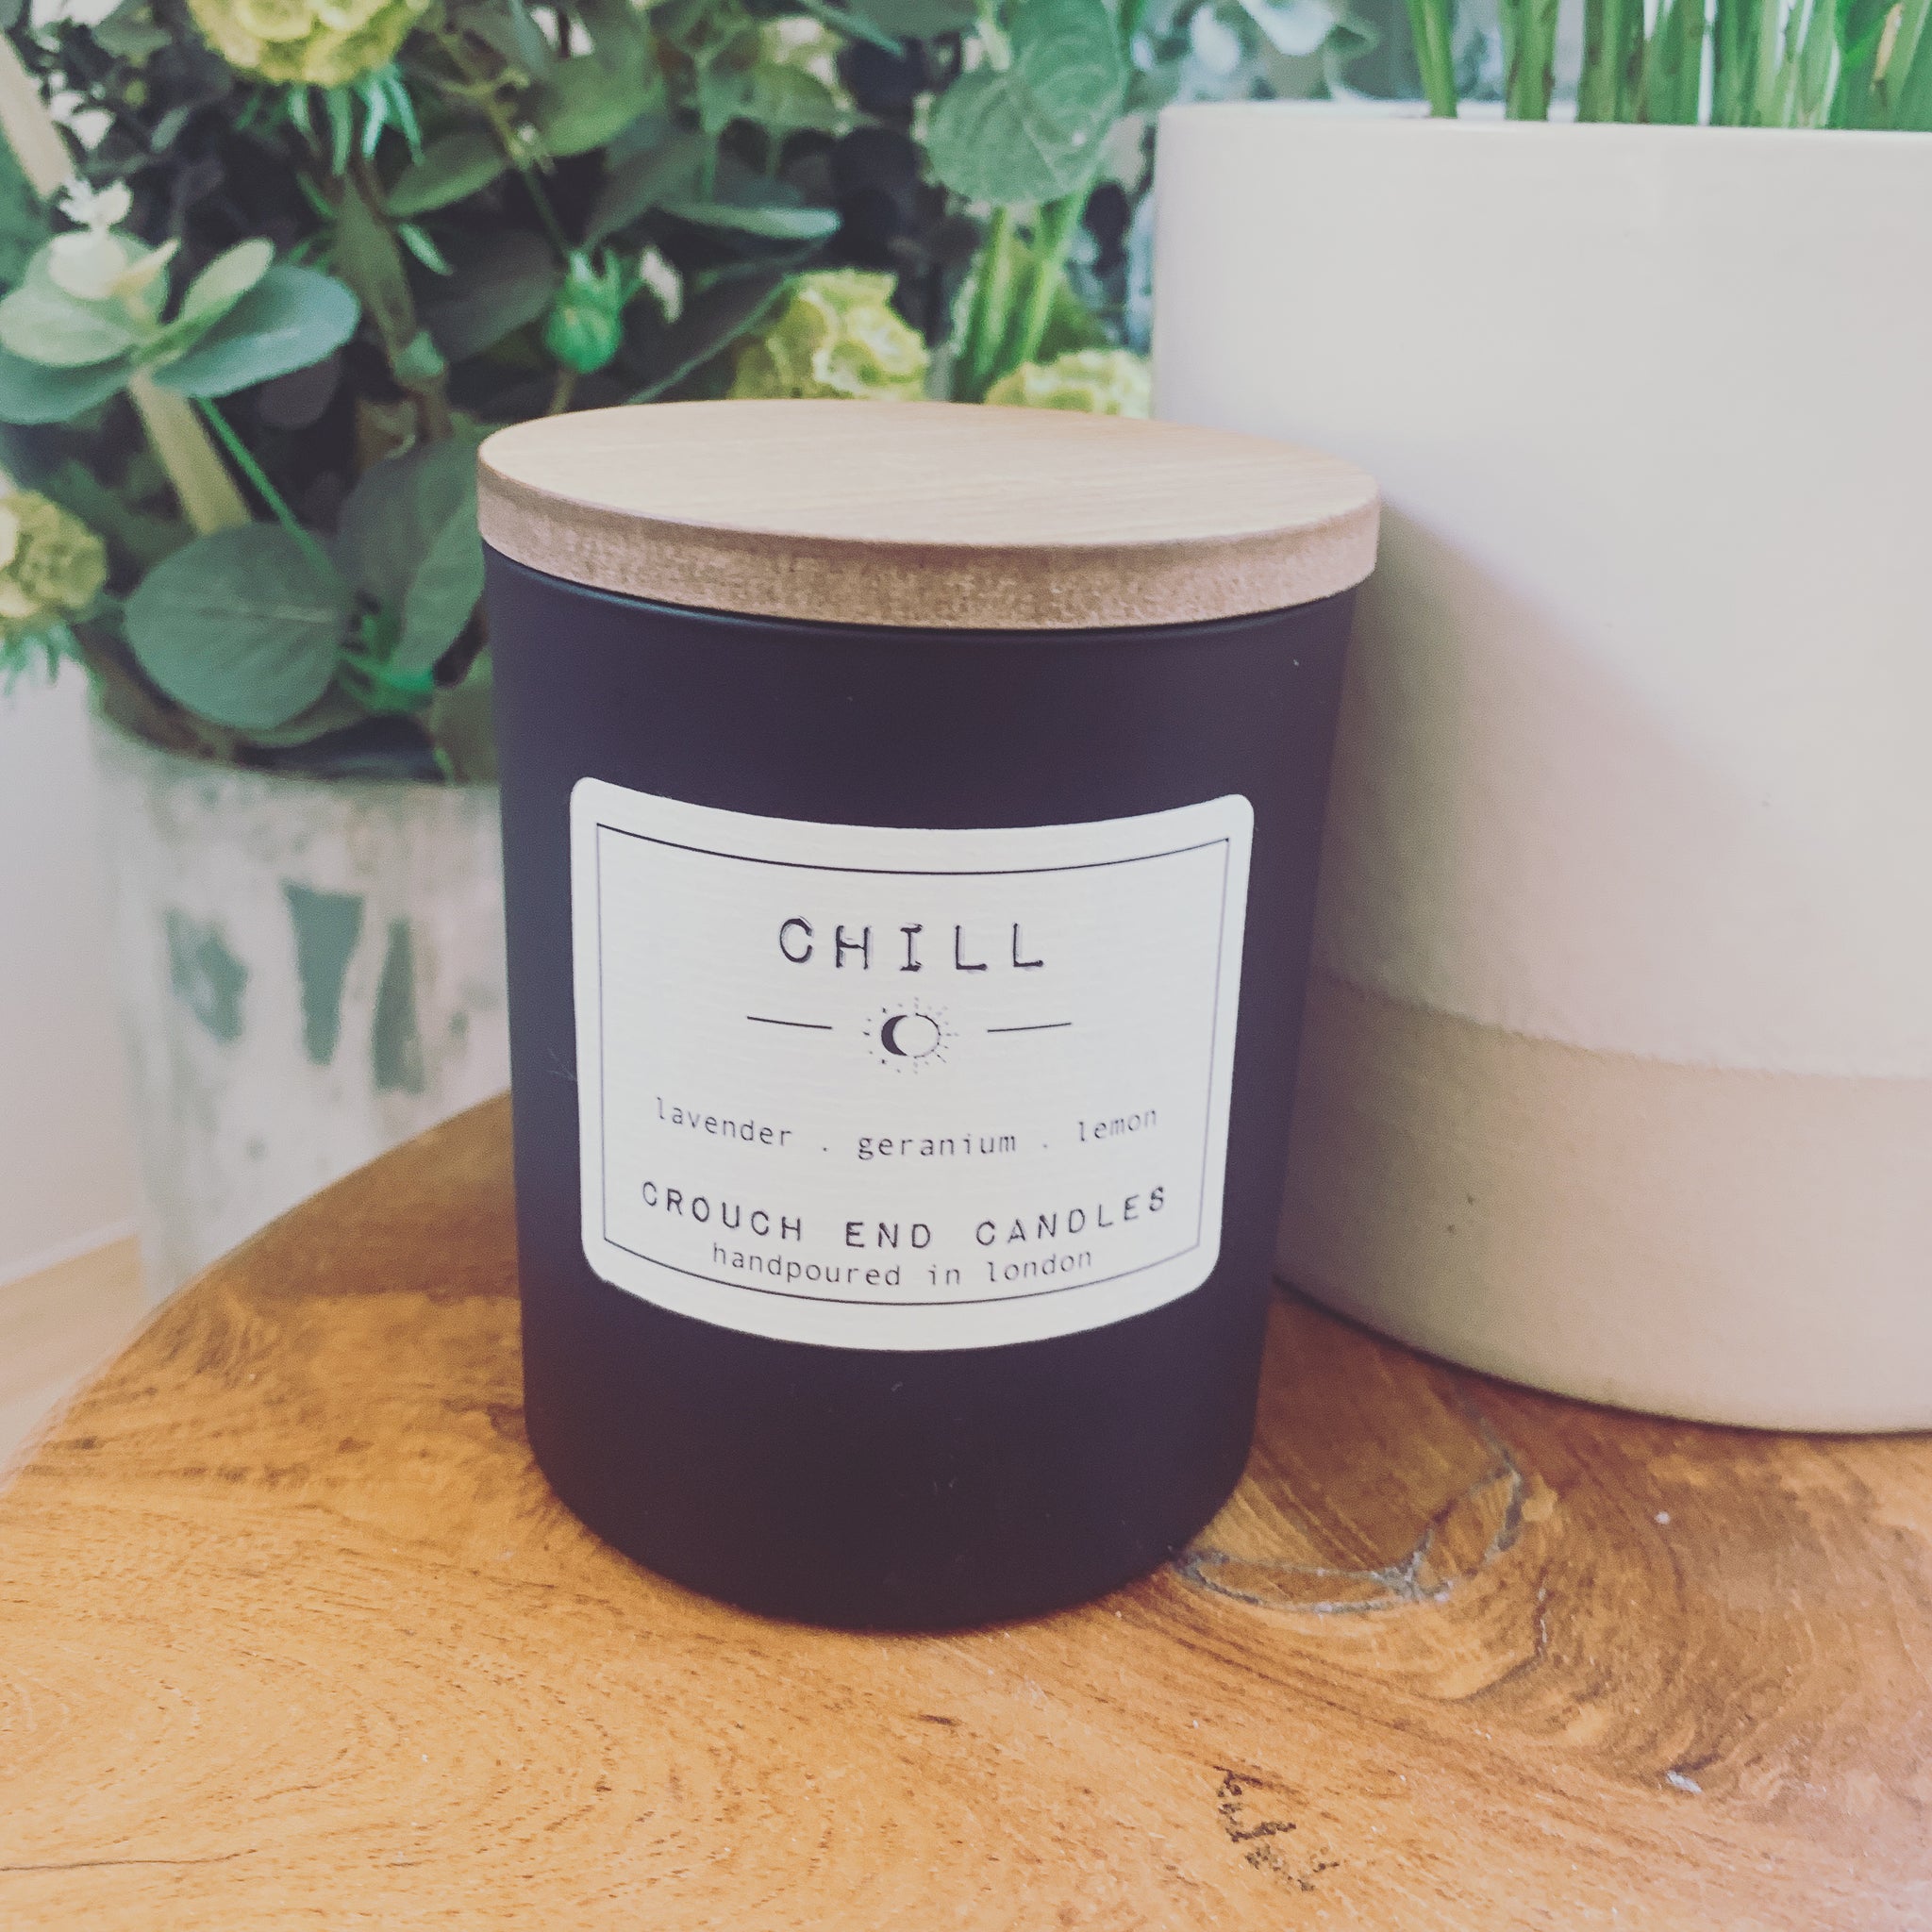 a black soy wax candle with a wooden lid, the cream  label says "Chill" lavender, geranium and lemon 